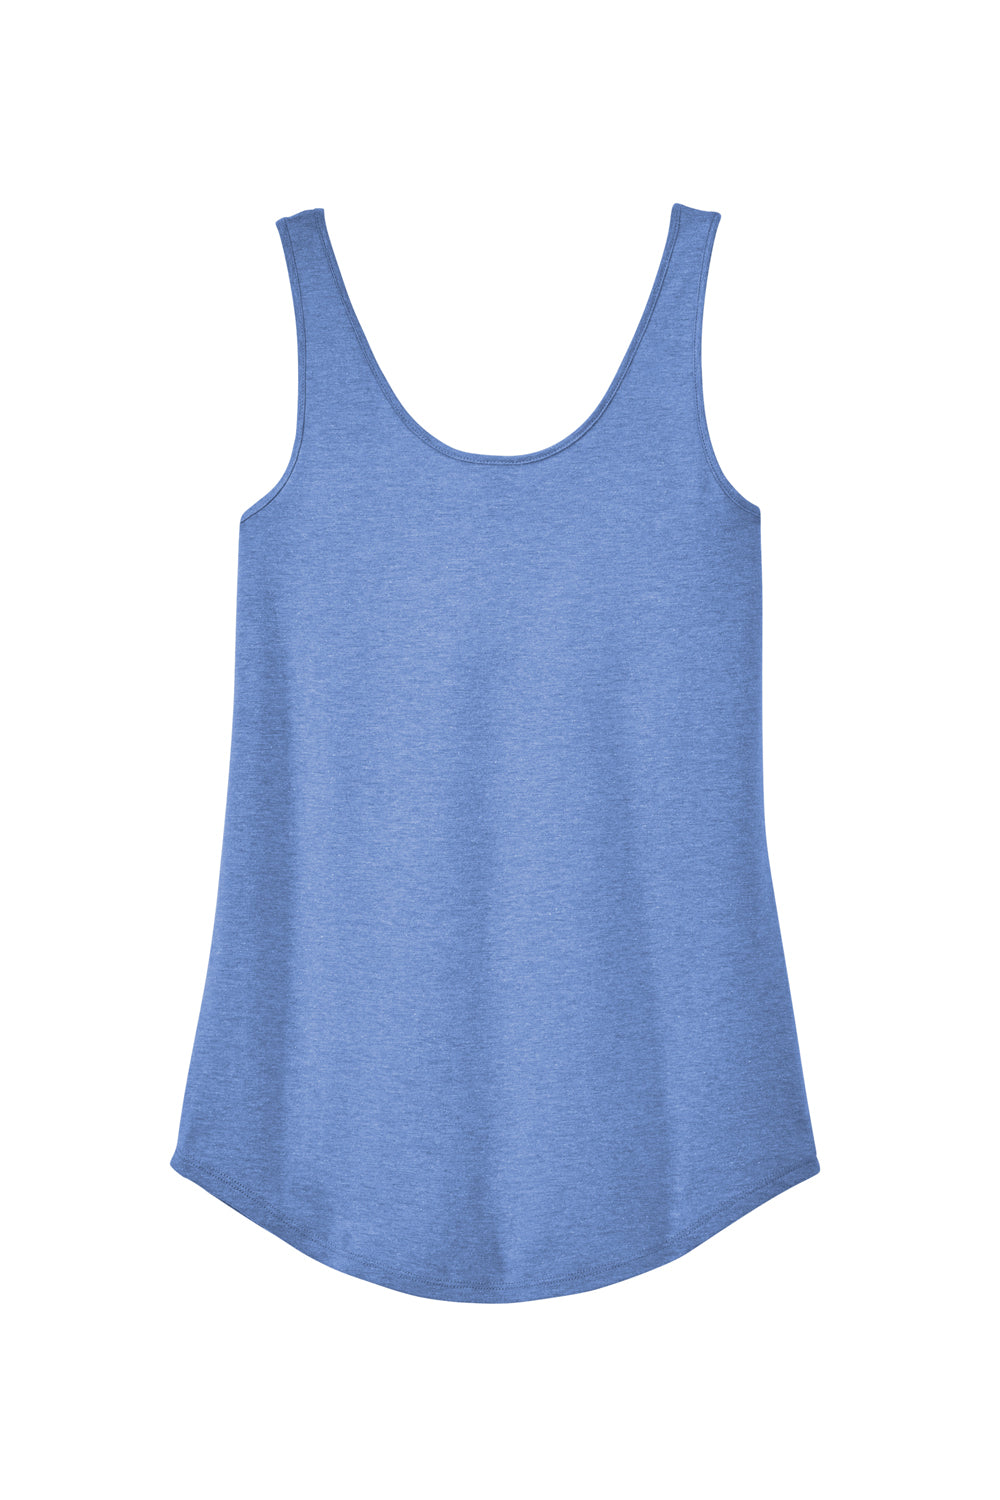 District DT151 Womens Perfect Tri Relaxed Tank Top Maritime Blue Frost Flat Back